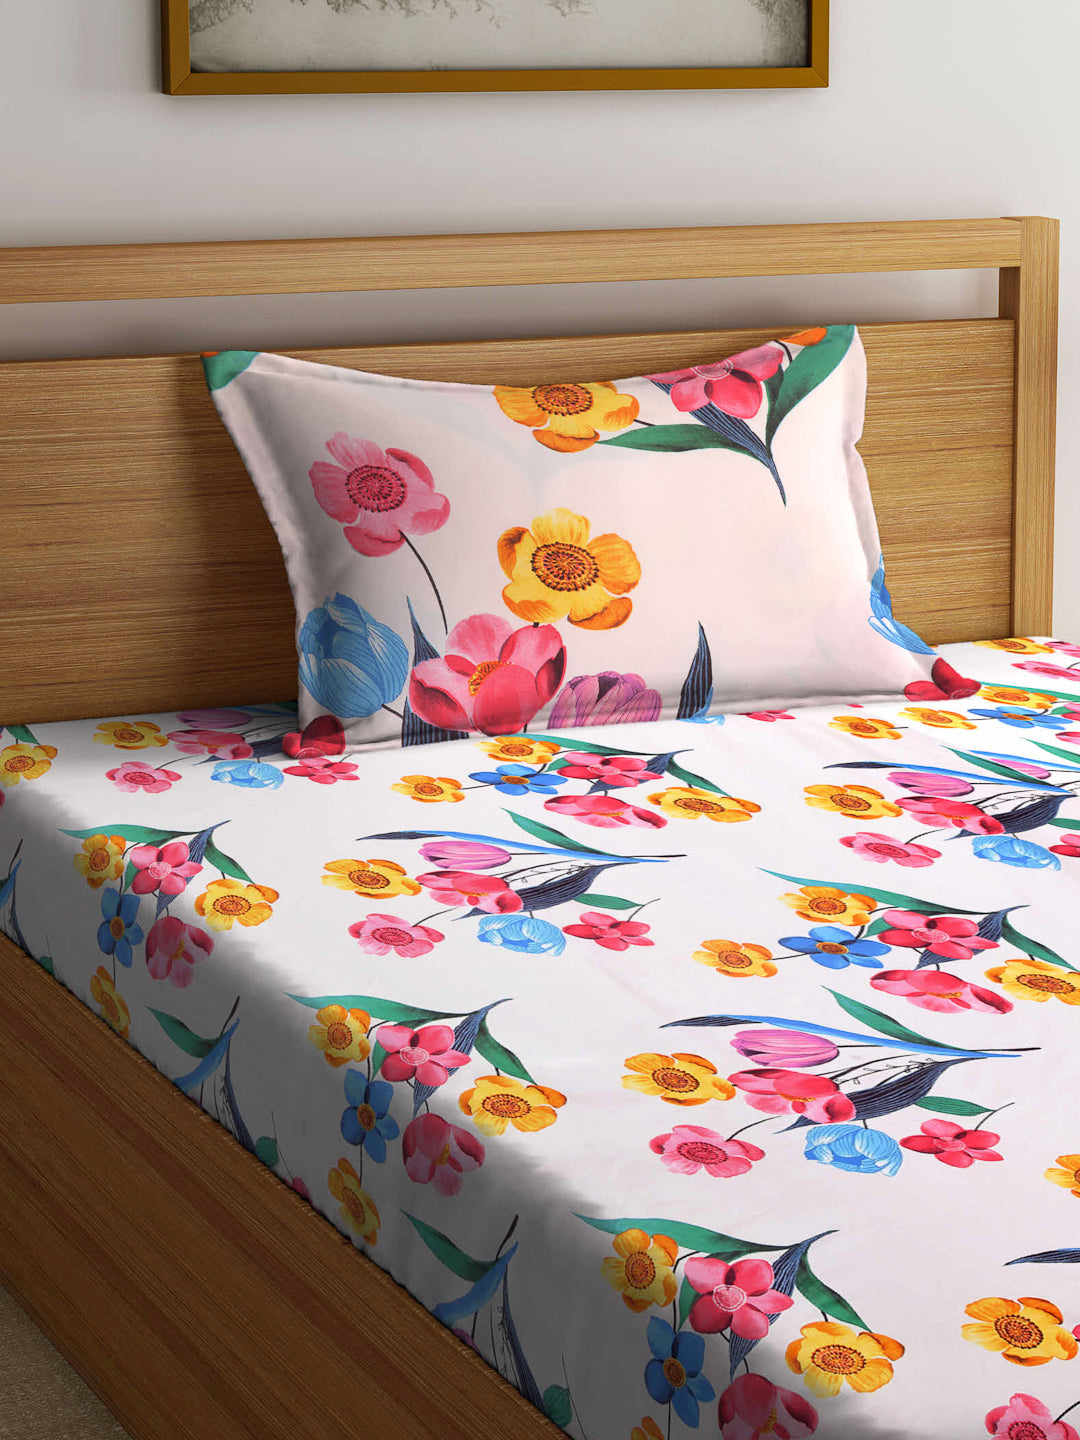 Arrabi Pink Floral TC Cotton Blend Single Size Fitted Bedsheet with 1 Pillow Cover (220 X 150 cm)